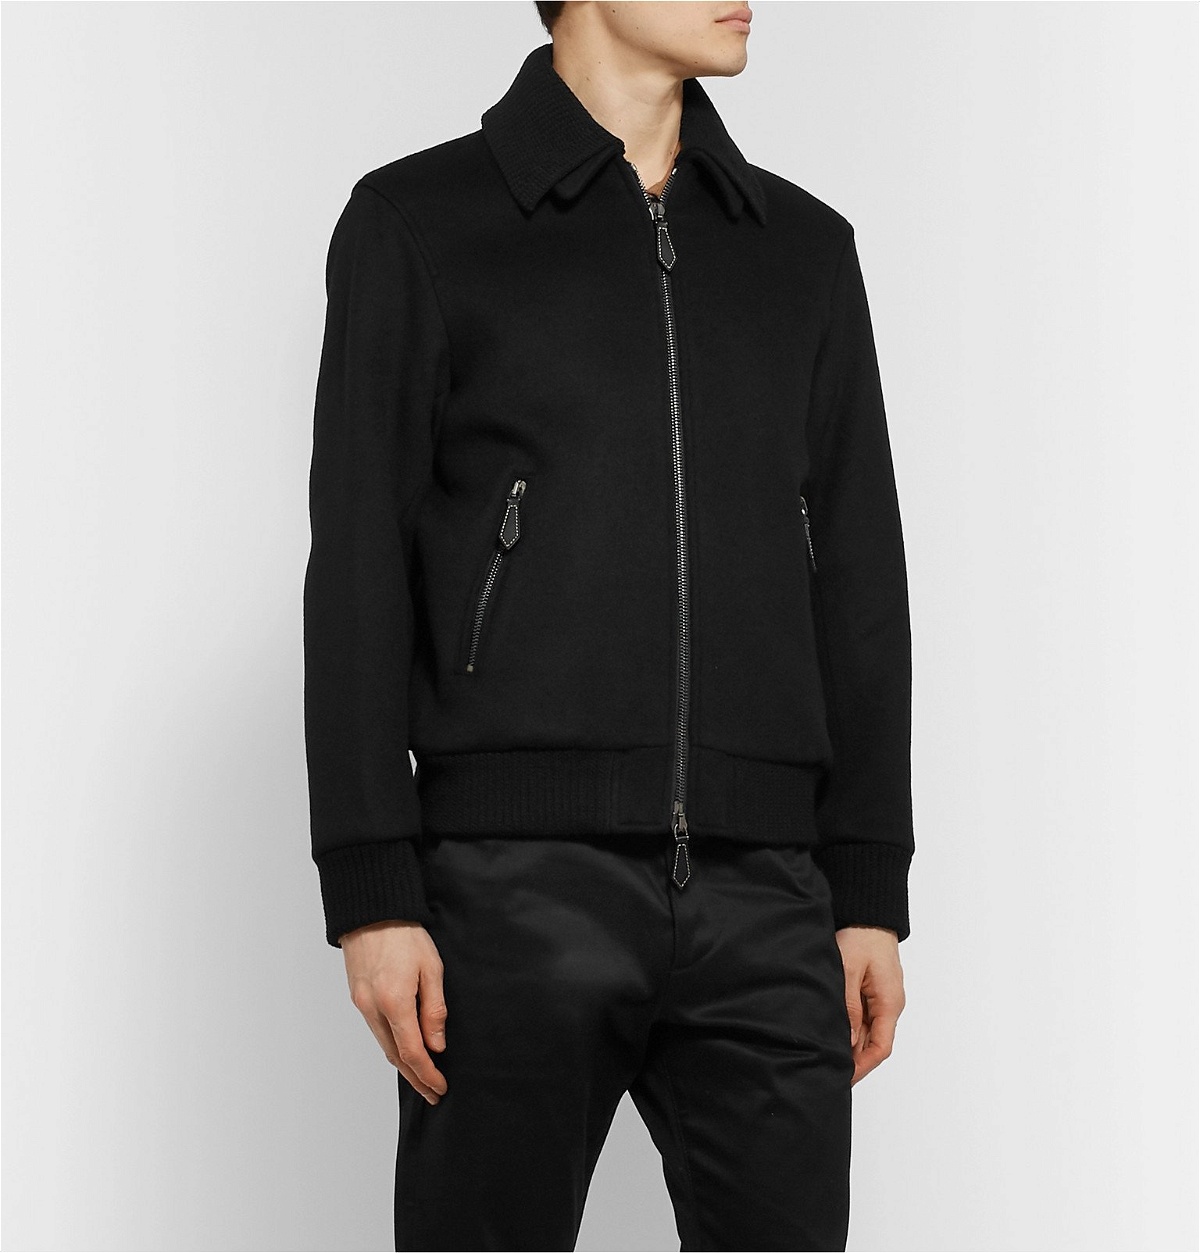 Burberry - Virgin Wool and Cashmere-Blend Bomber Jacket - Black Burberry